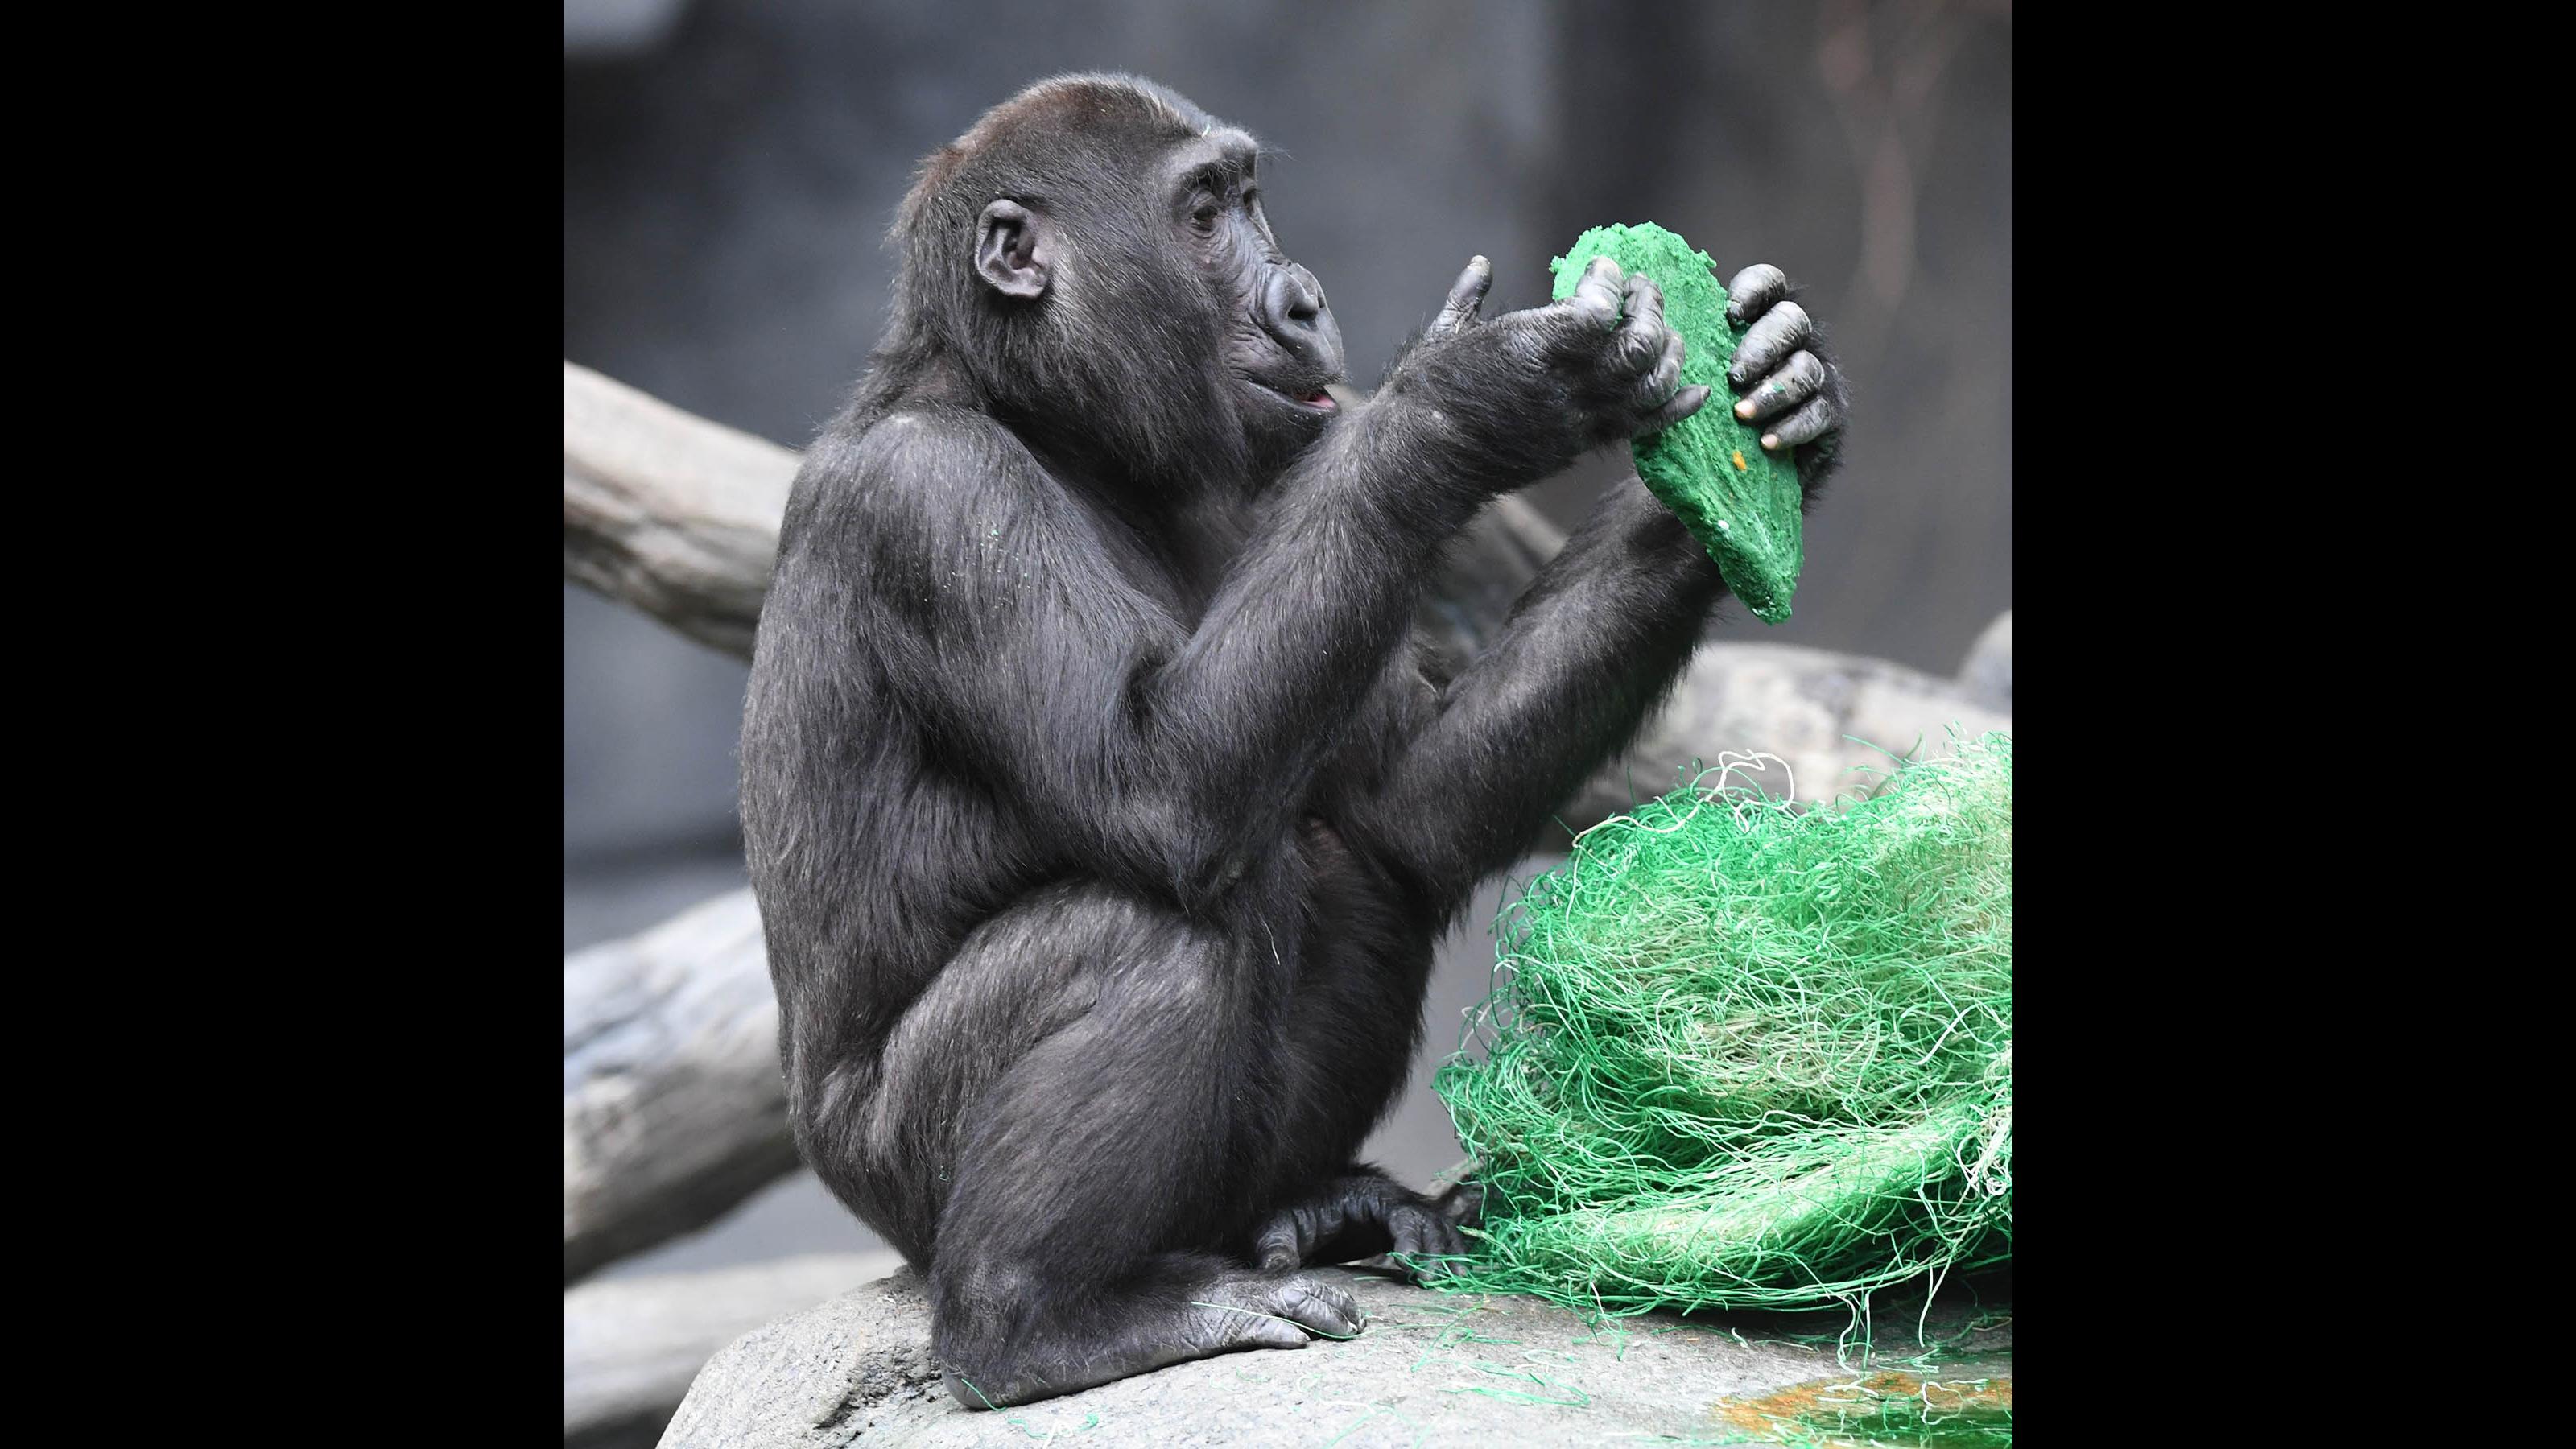 Nora and other western lowland gorillas at Brookfield Zoo had their nest area dyed with a non-toxic green coloring for St. Patrick's Day. (Jim Schulz / Chicago Zoological Society)